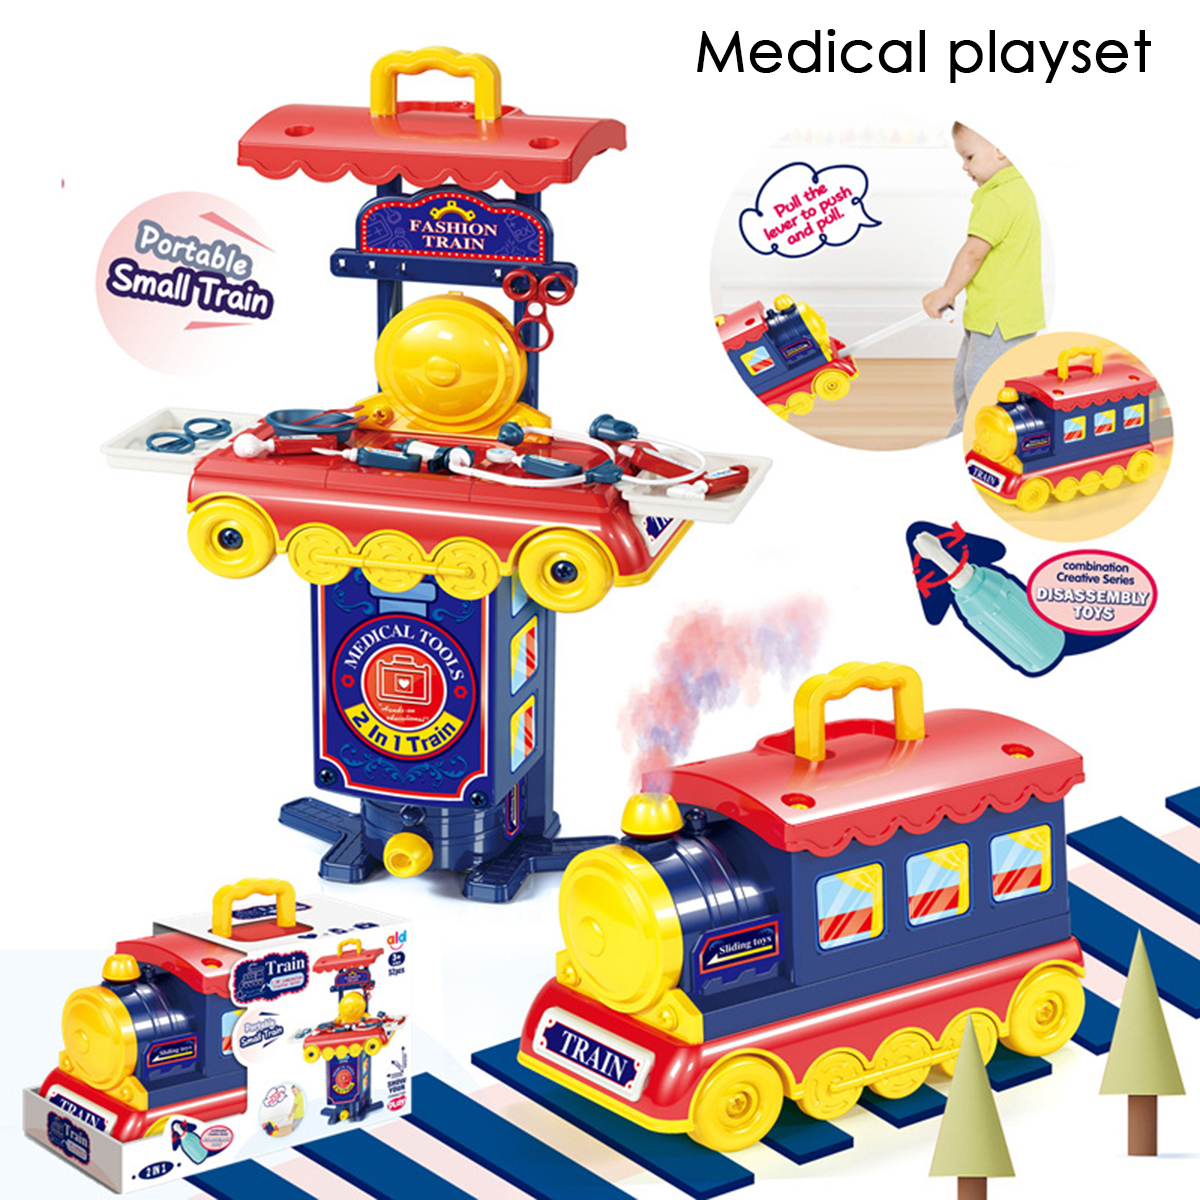 2-IN-1-Multi-style-Kitchen-Cooking-Play-and-Portable-Small-Train-Learning-Set-Toys-for-Kids-Gift-1673927-6